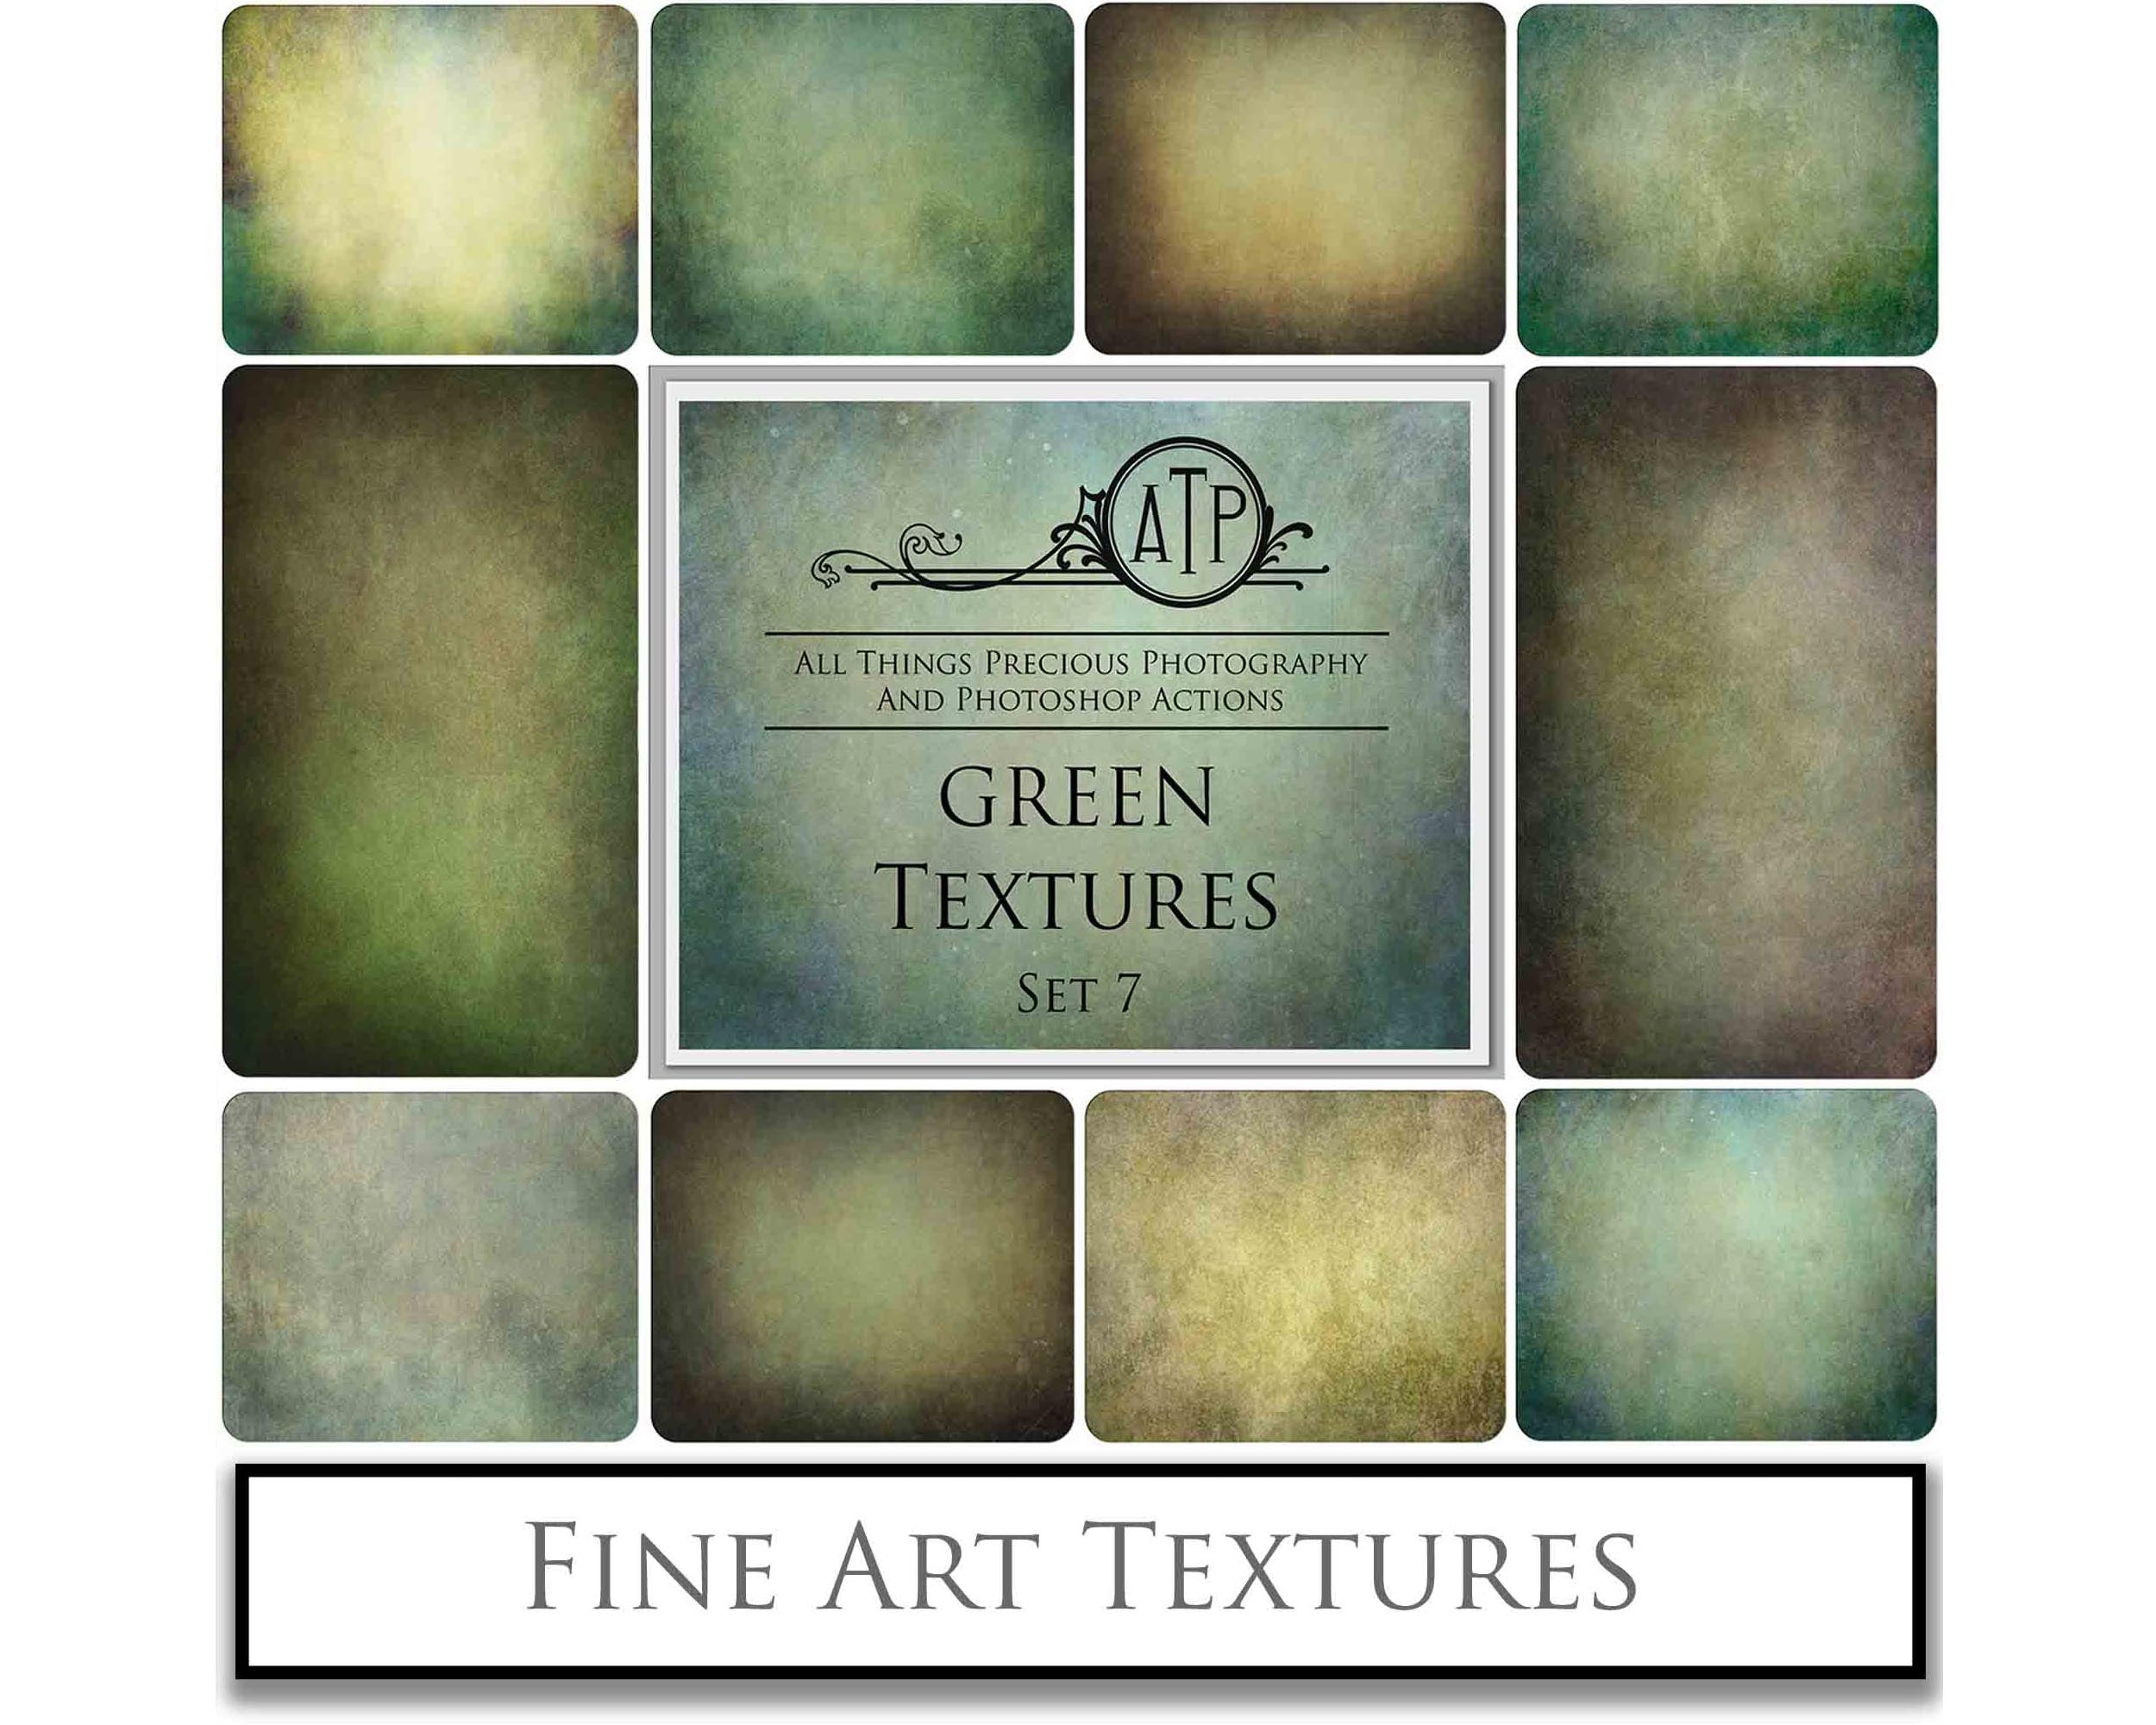 Vibrant Soft Green textures. Fine art textures. Rich, Nature colour tints. Texture for photographers and digital editing. Photo Overlays. Antique, Vintage, Grunge, Light, Dark Bundle. Textured printable Canvas, Colour, Monochrome, Bundle. High resolution, 300dpi Graphic Assets for photography, digital scrapbooking and design. By ATP Textures